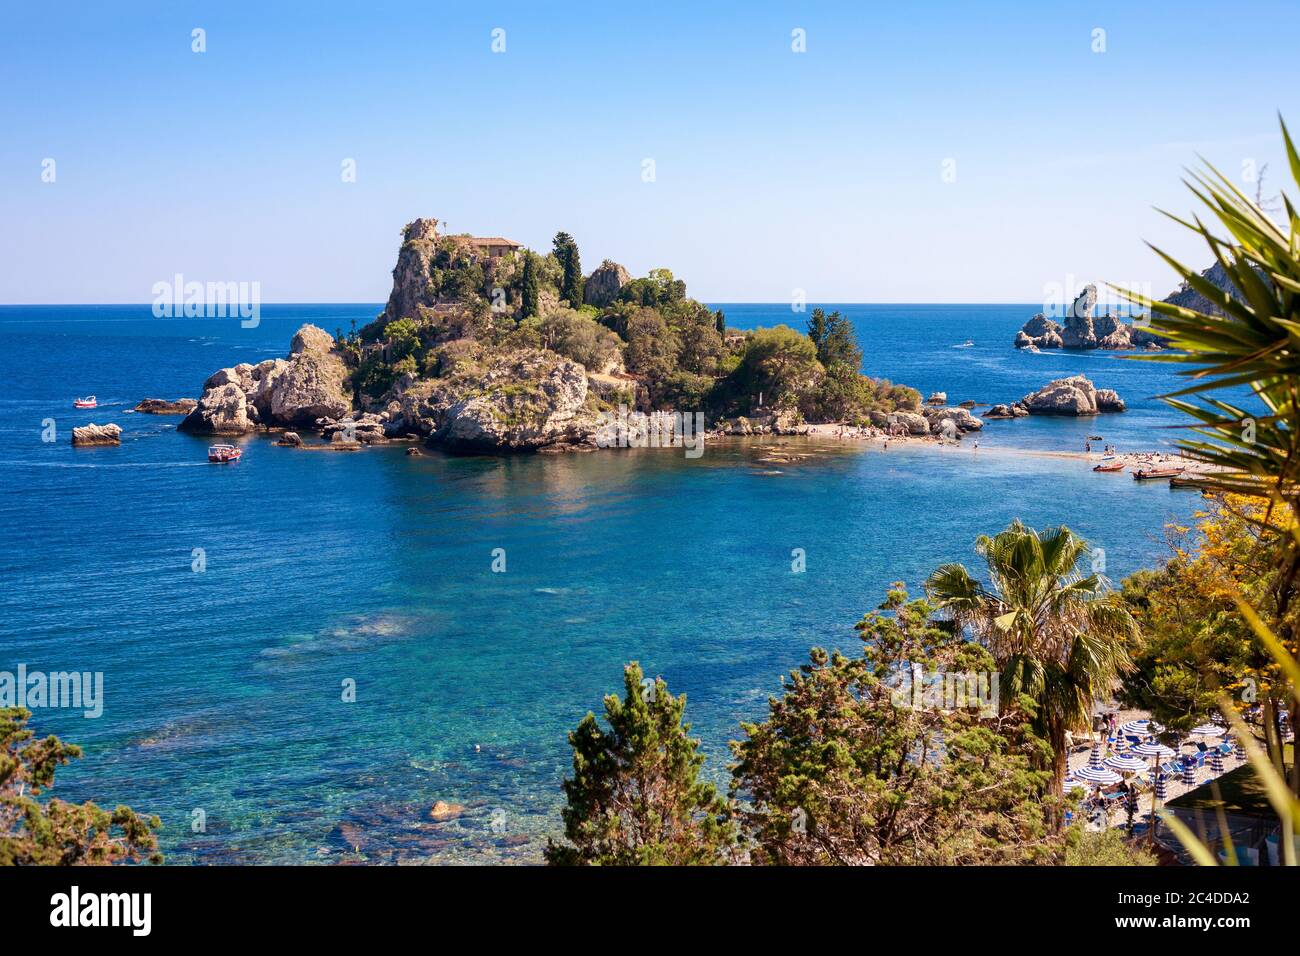 The Isola Bella island with the beach, excursion boats and bathers in Taormina, Italy Stock Photo